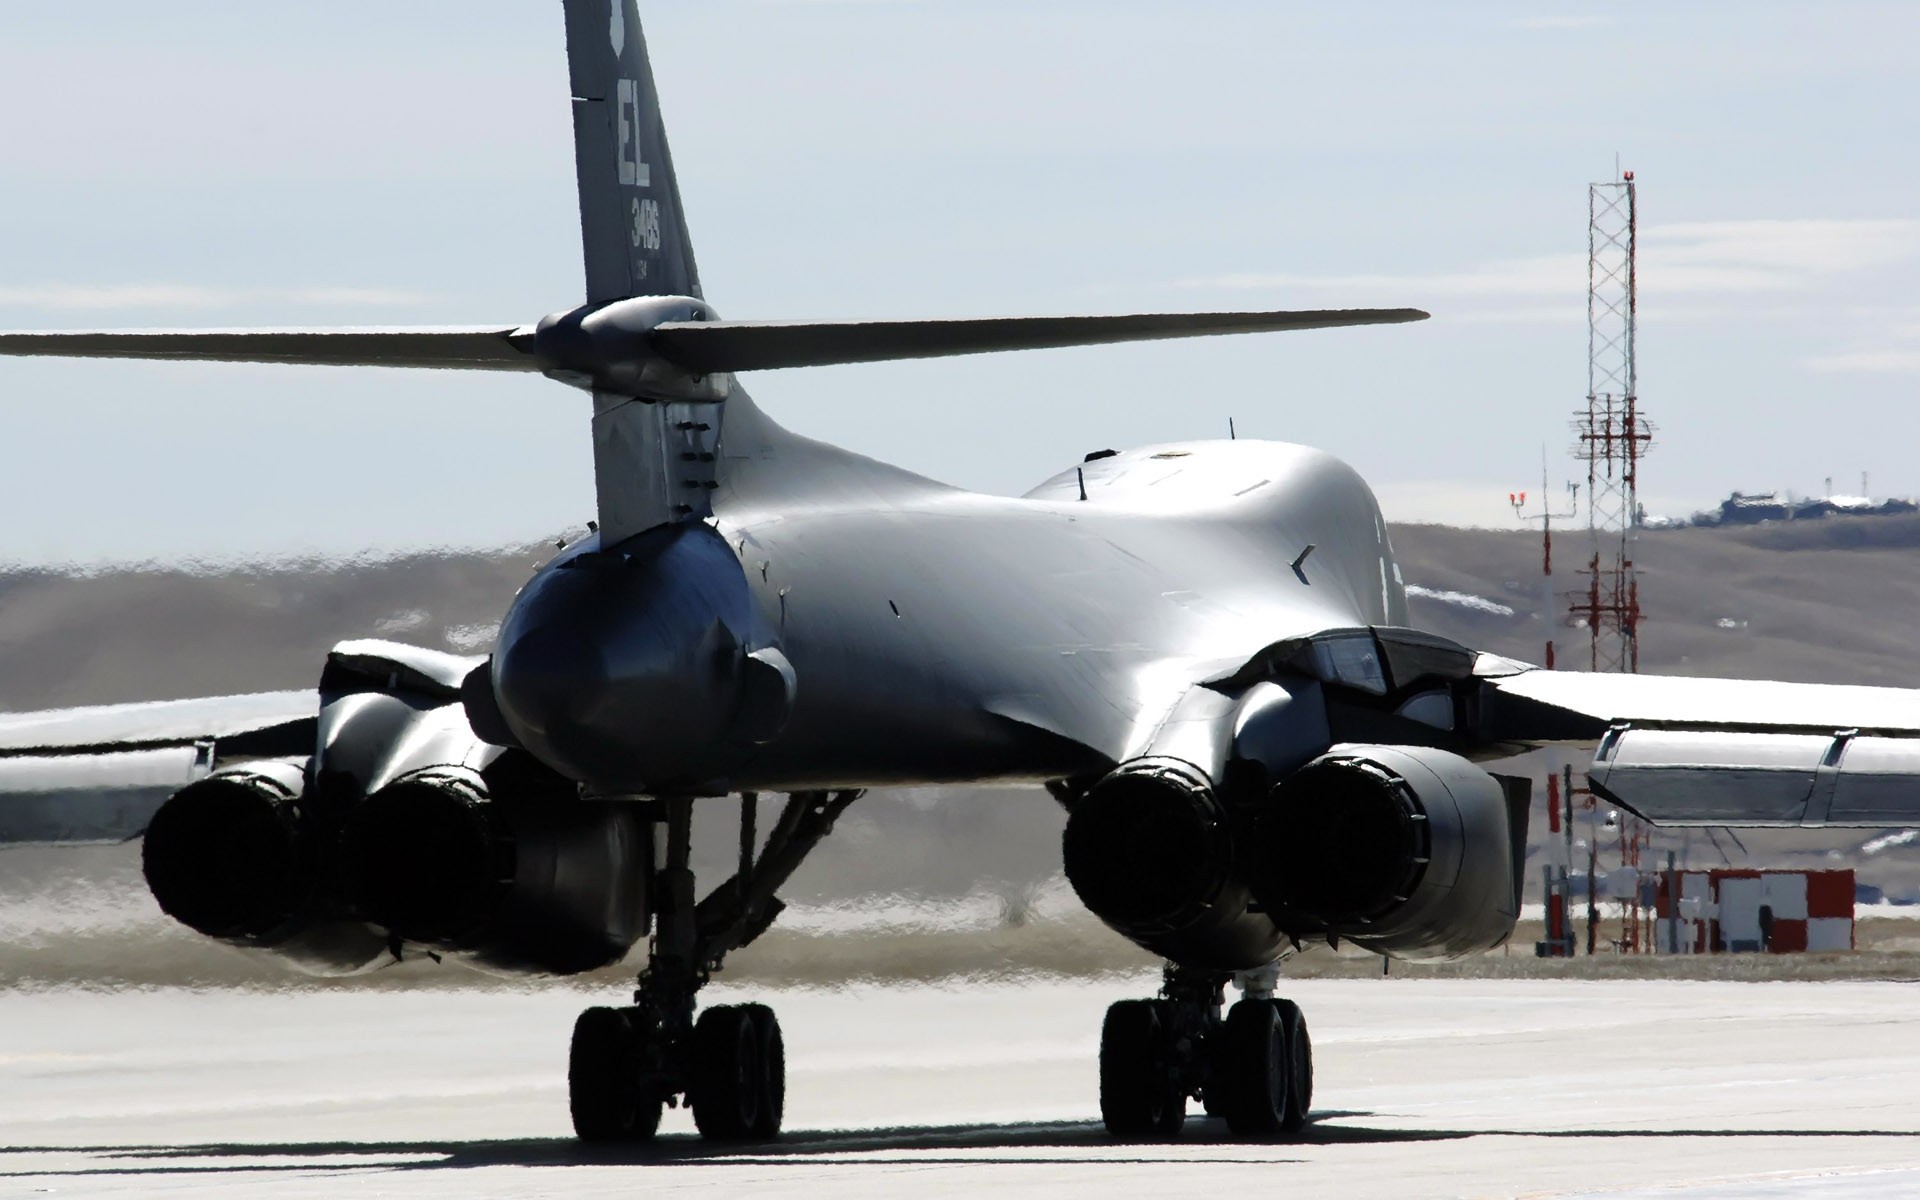 General 1920x1200 Rockwell B-1 Lancer aircraft vehicle military military aircraft Bomber strategic bomber US Air Force rear view American aircraft airplane